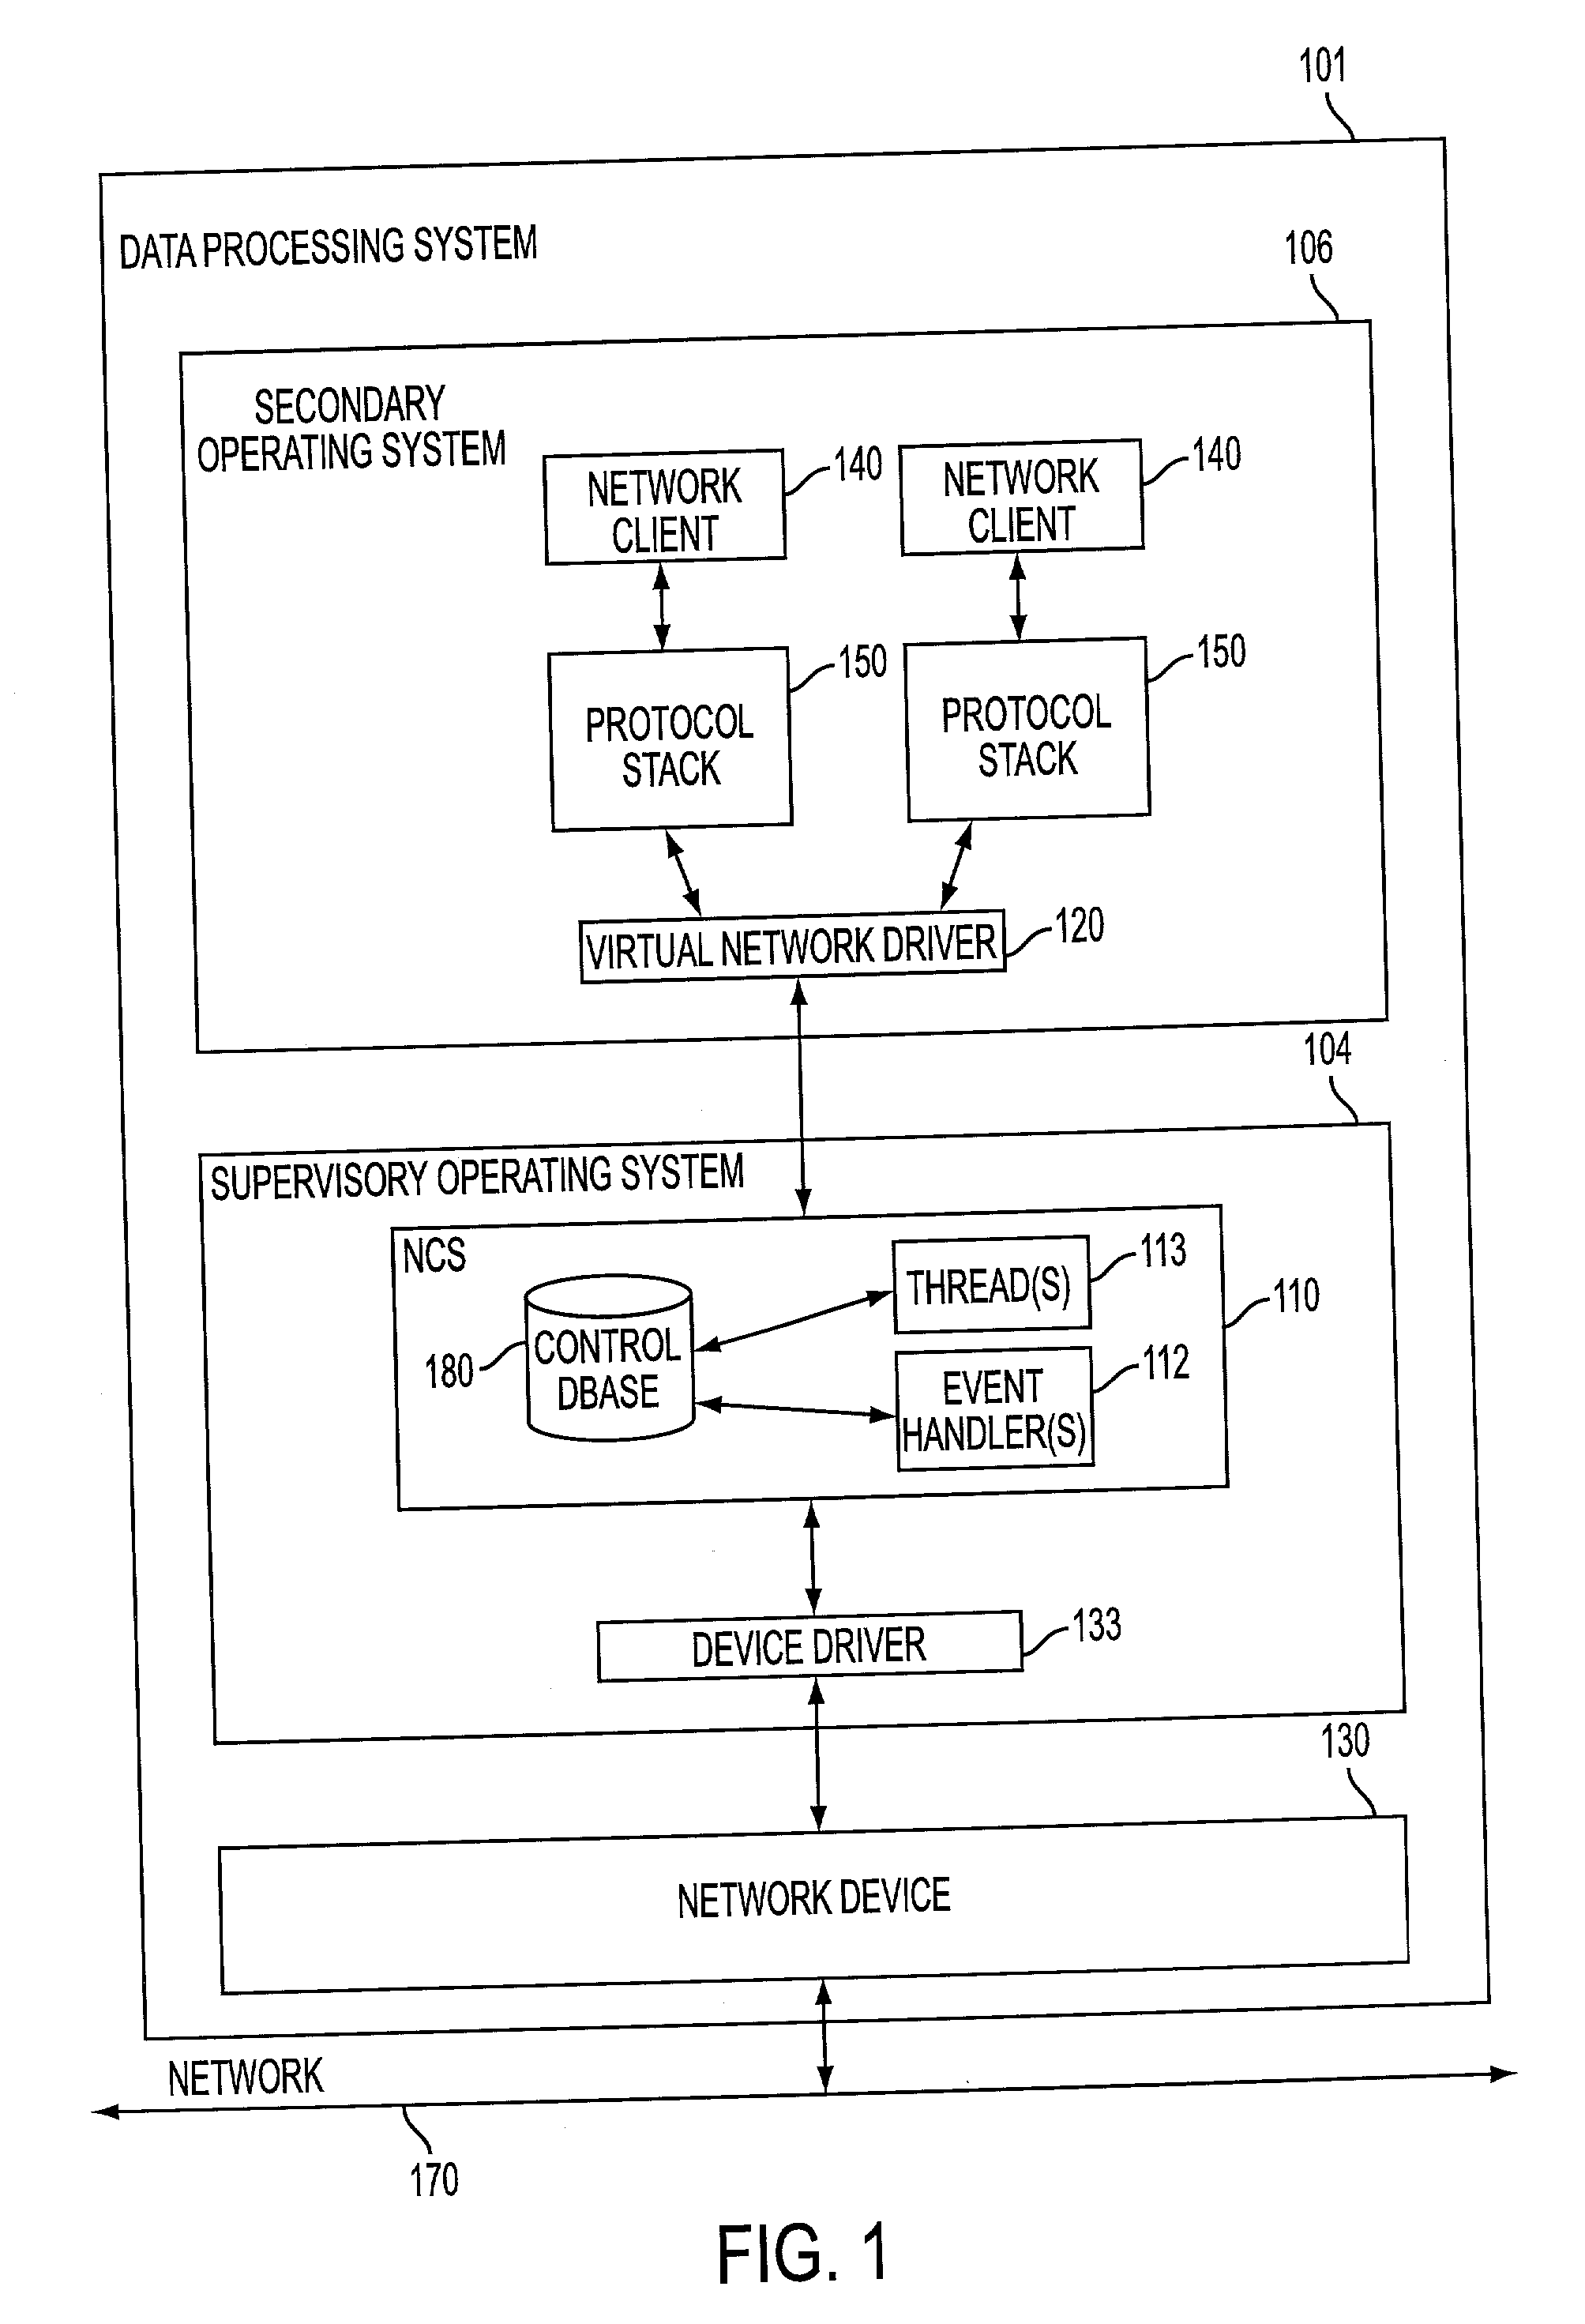 System, method and computer program product for monitoring and controlling network connections from a supervisory operating system